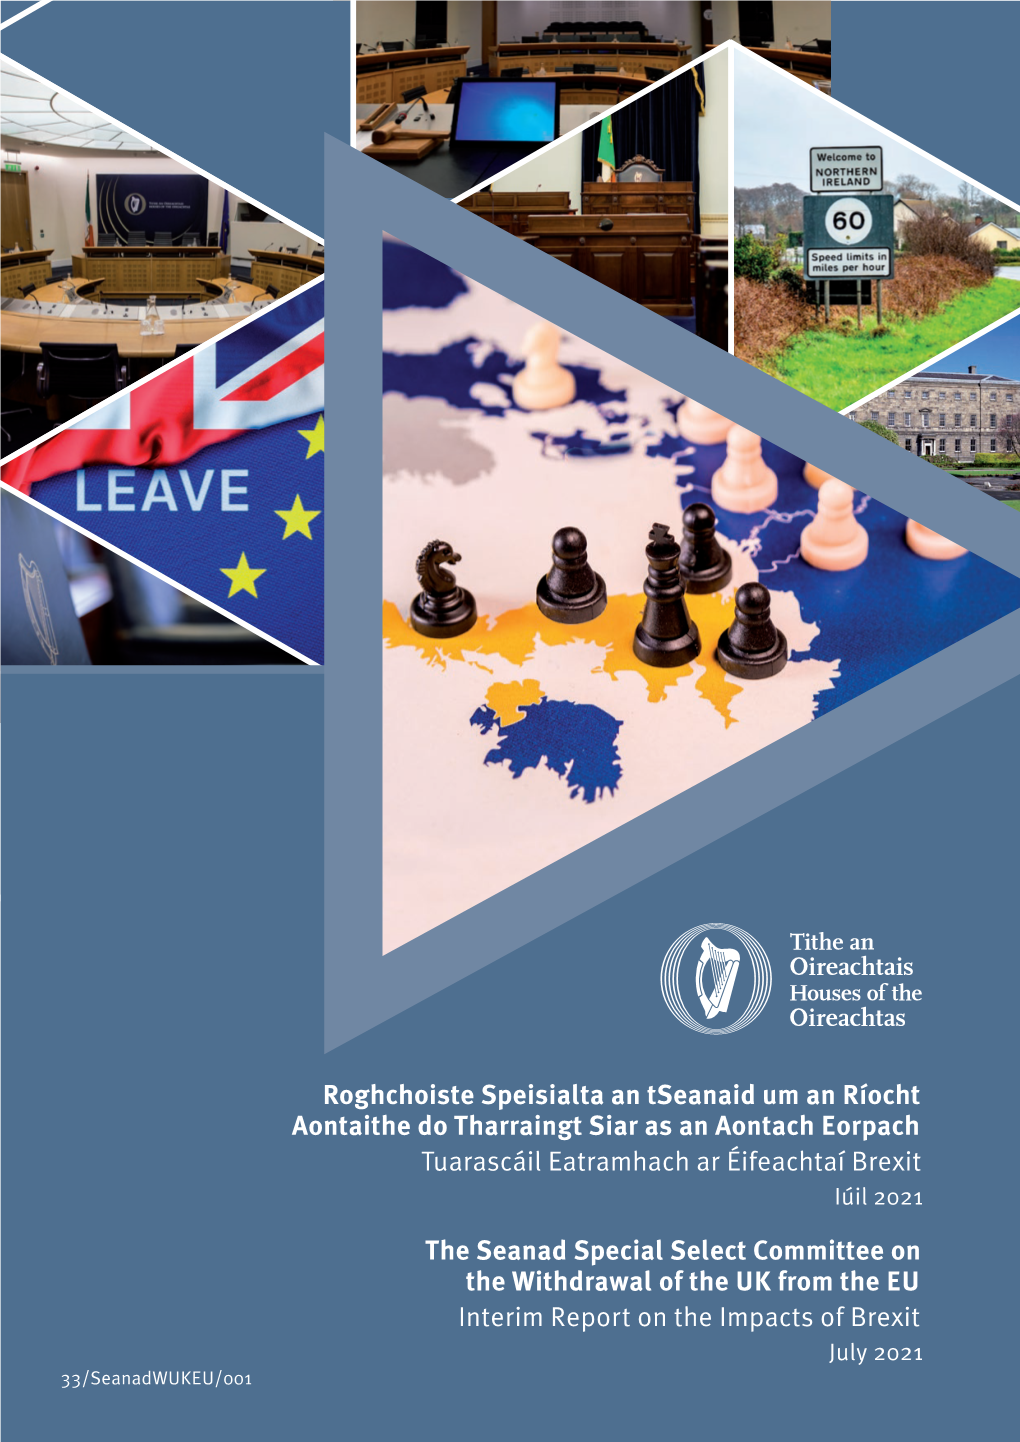 The Seanad Special Select Committee on the Withdrawal of the UK from the EU Interim Report on the Impacts of Brexit July 2021 33/Seanadwukeu/001